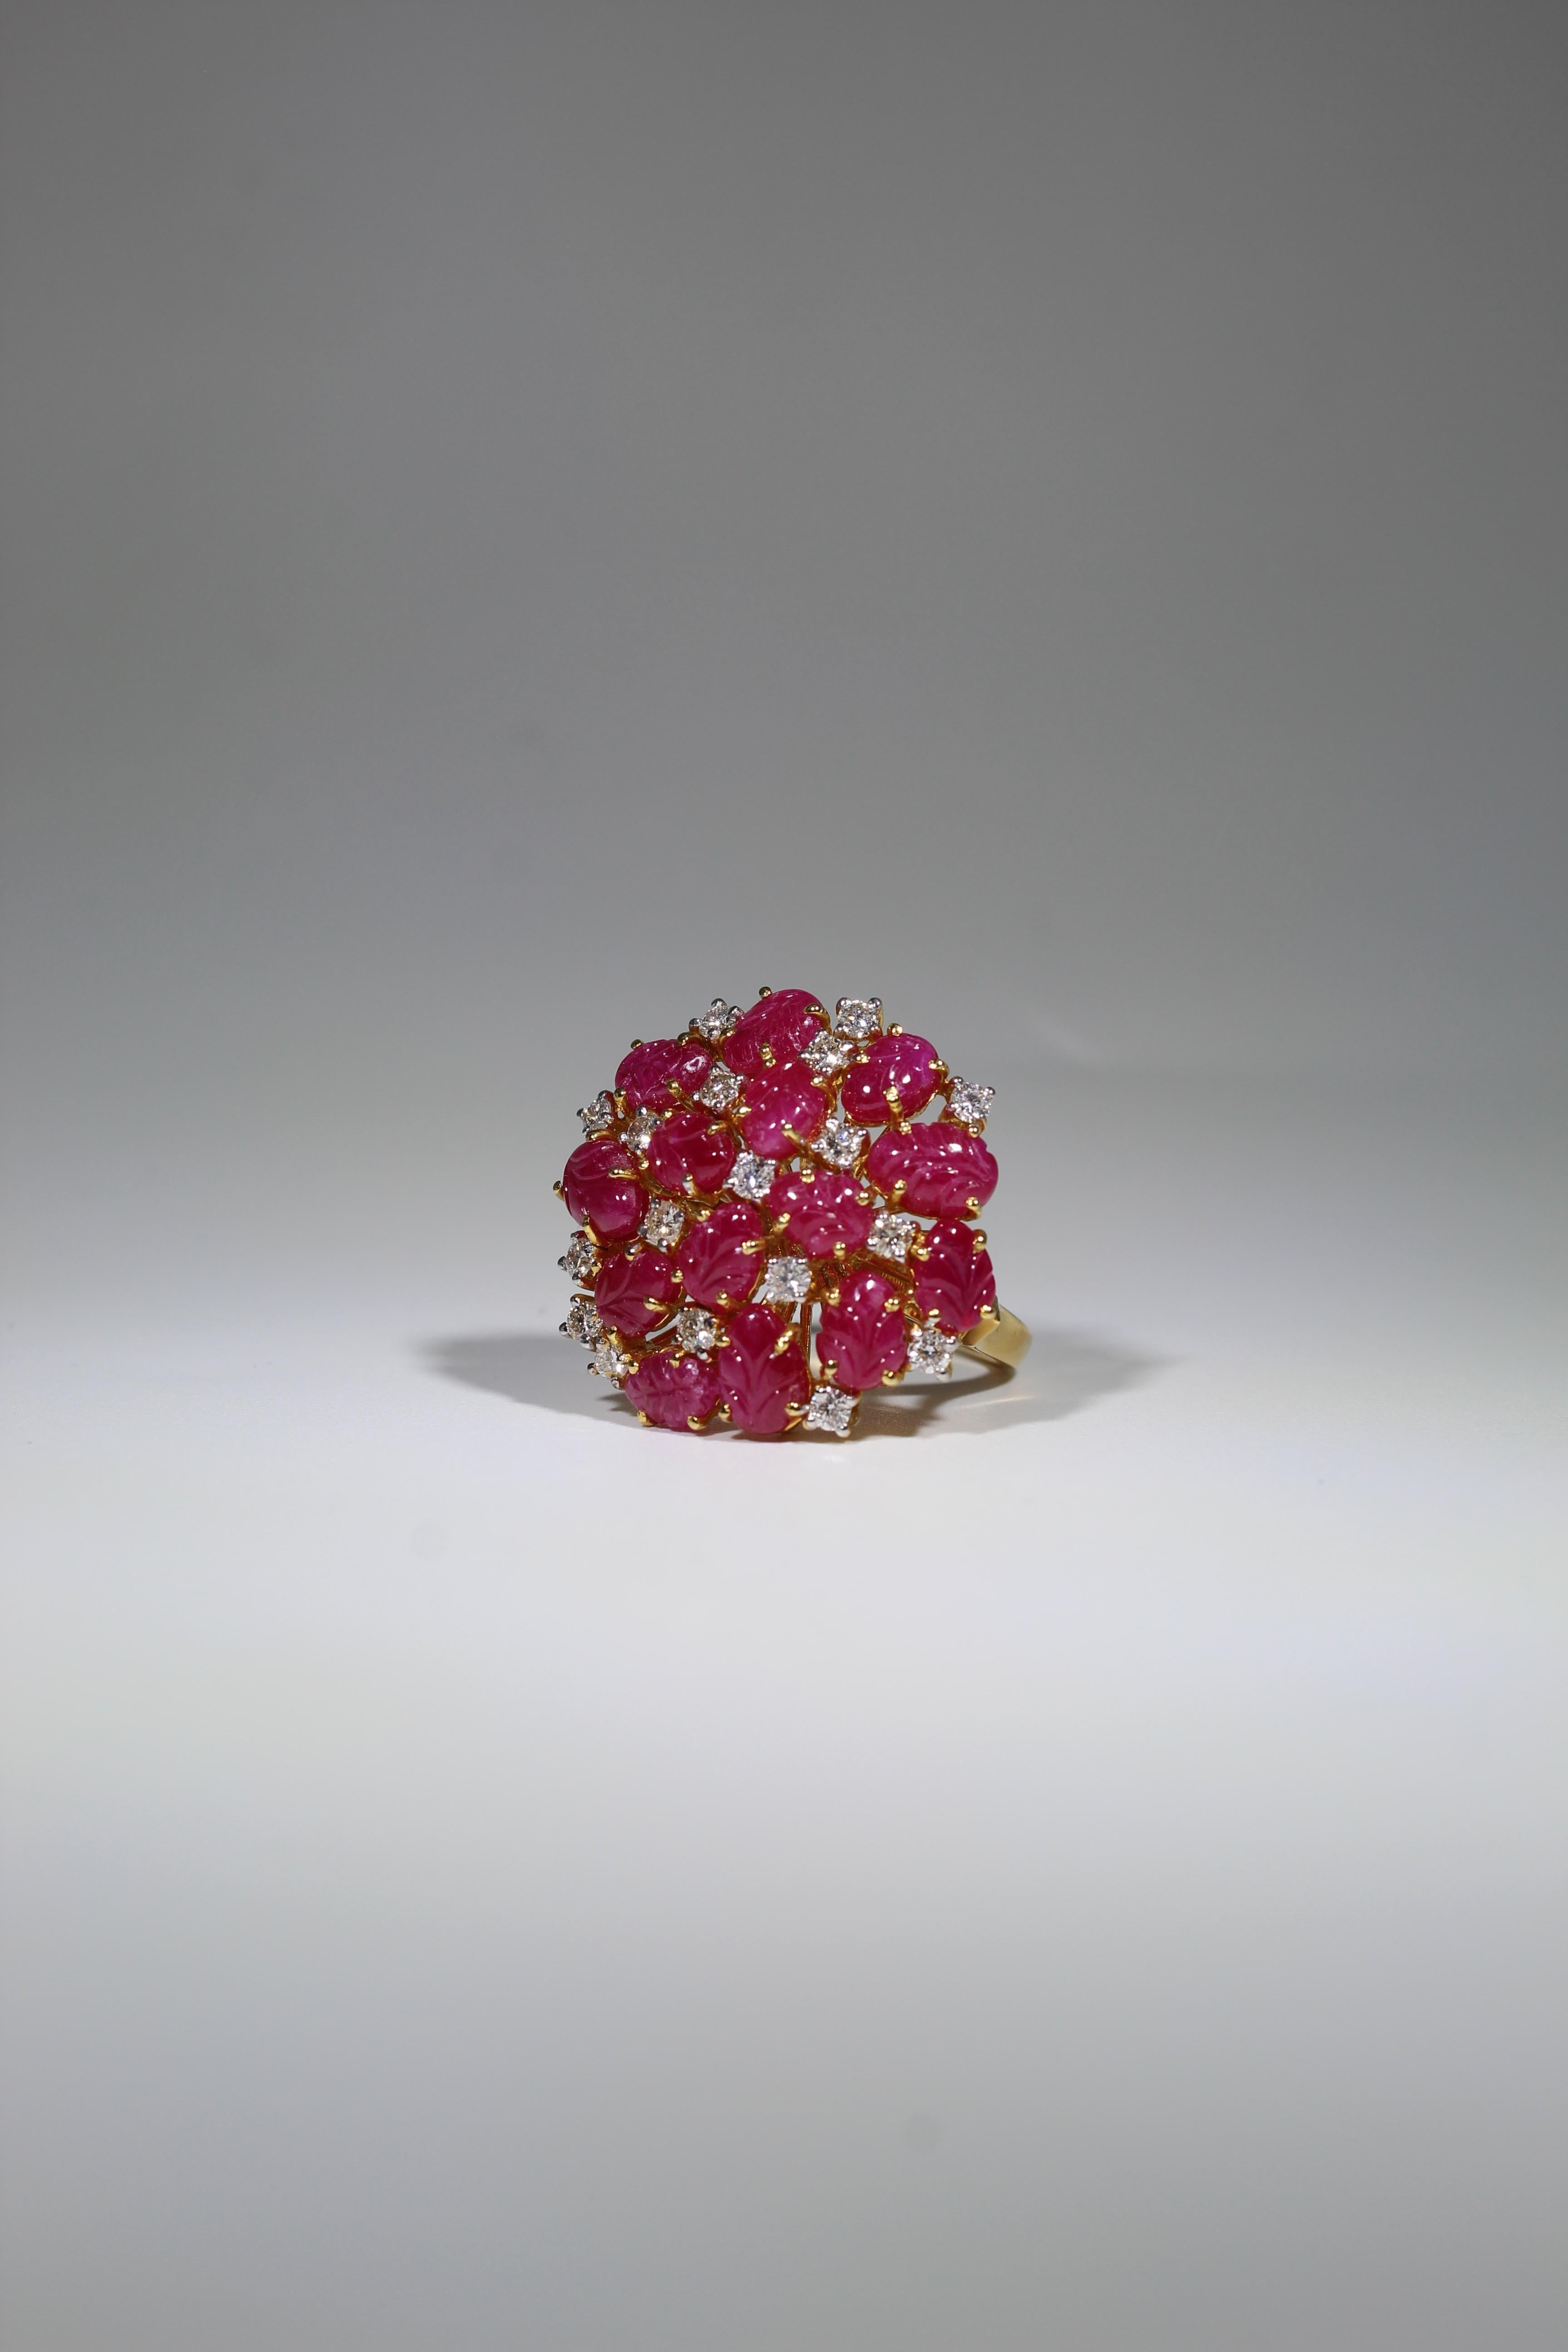 Introducing our Carved Ruby and Diamond Ring, a true masterpiece of craftsmanship and elegance that seamlessly combines the fiery allure of rubies with the brilliance of diamonds, set in luxurious 18K gold. This ring is a symbol of timeless beauty